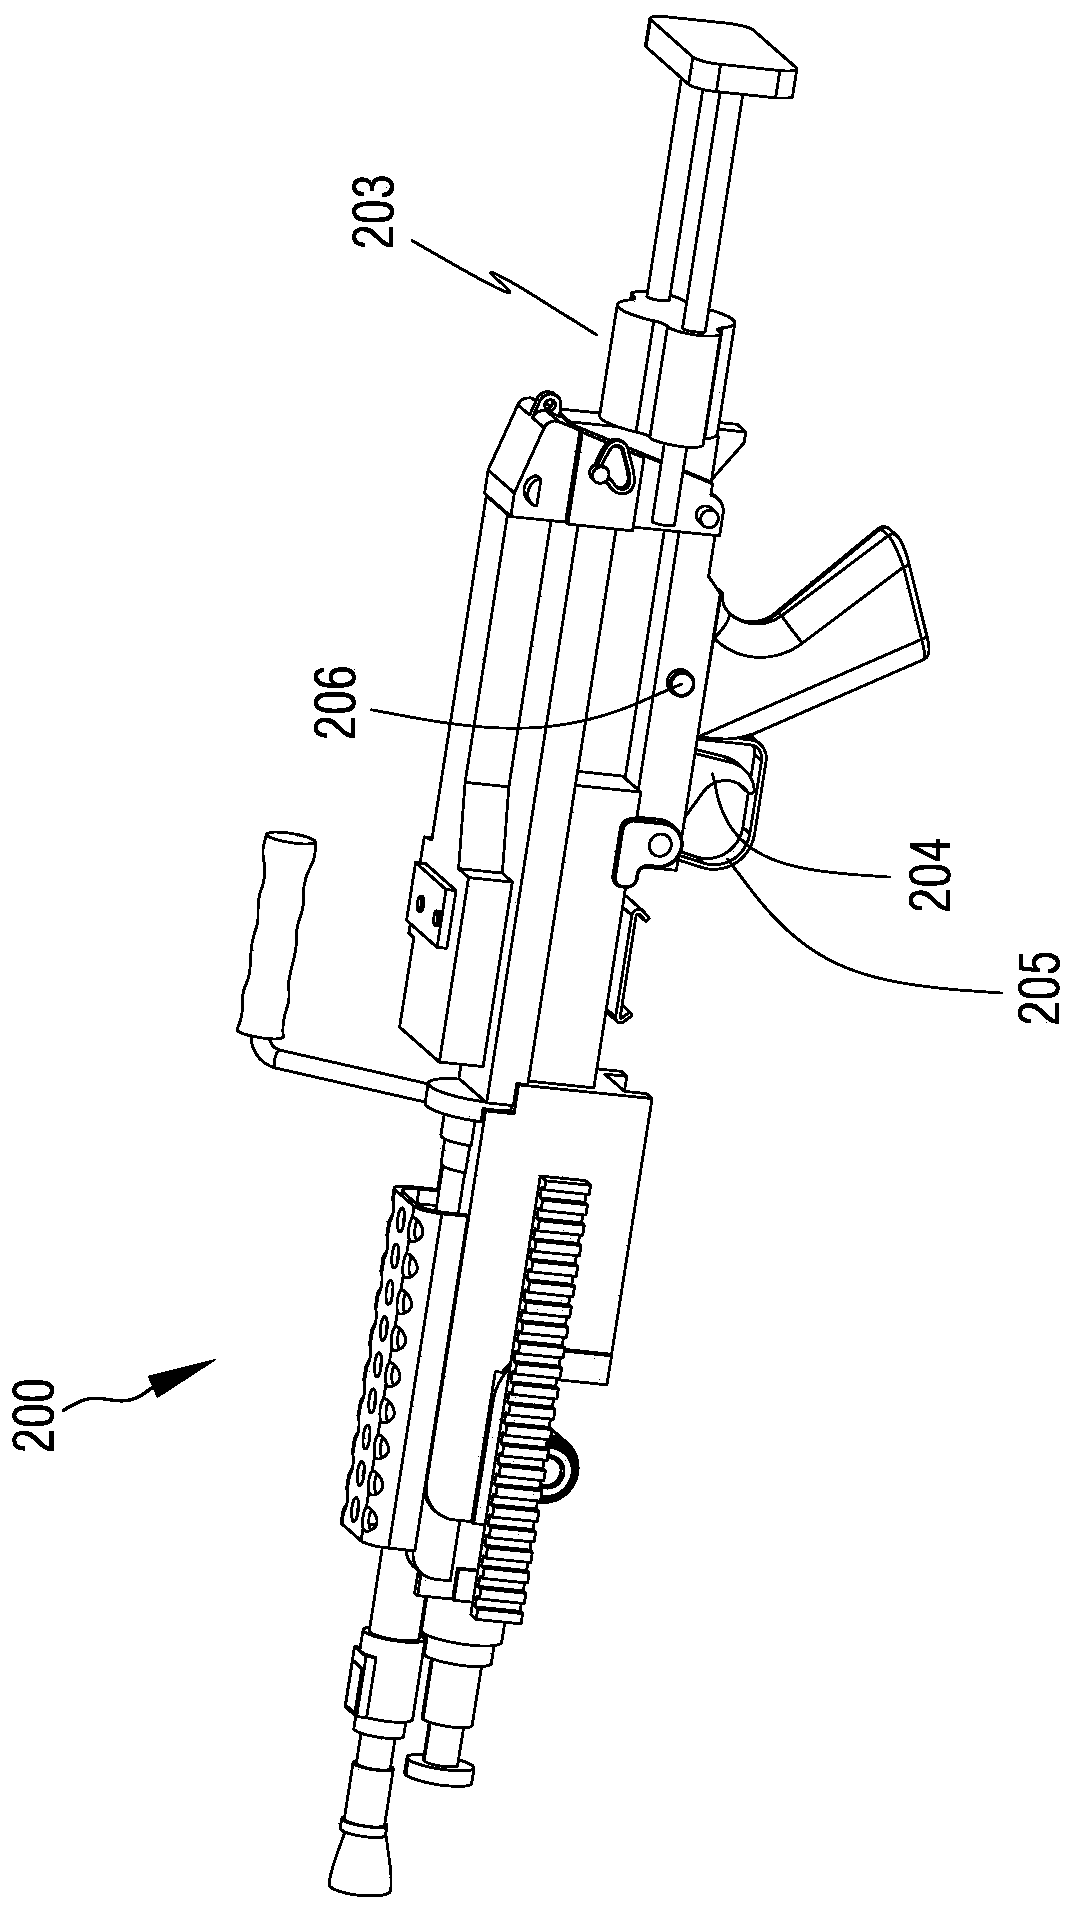 Driving structure for mounting machine gun on unmanned aerial vehicle